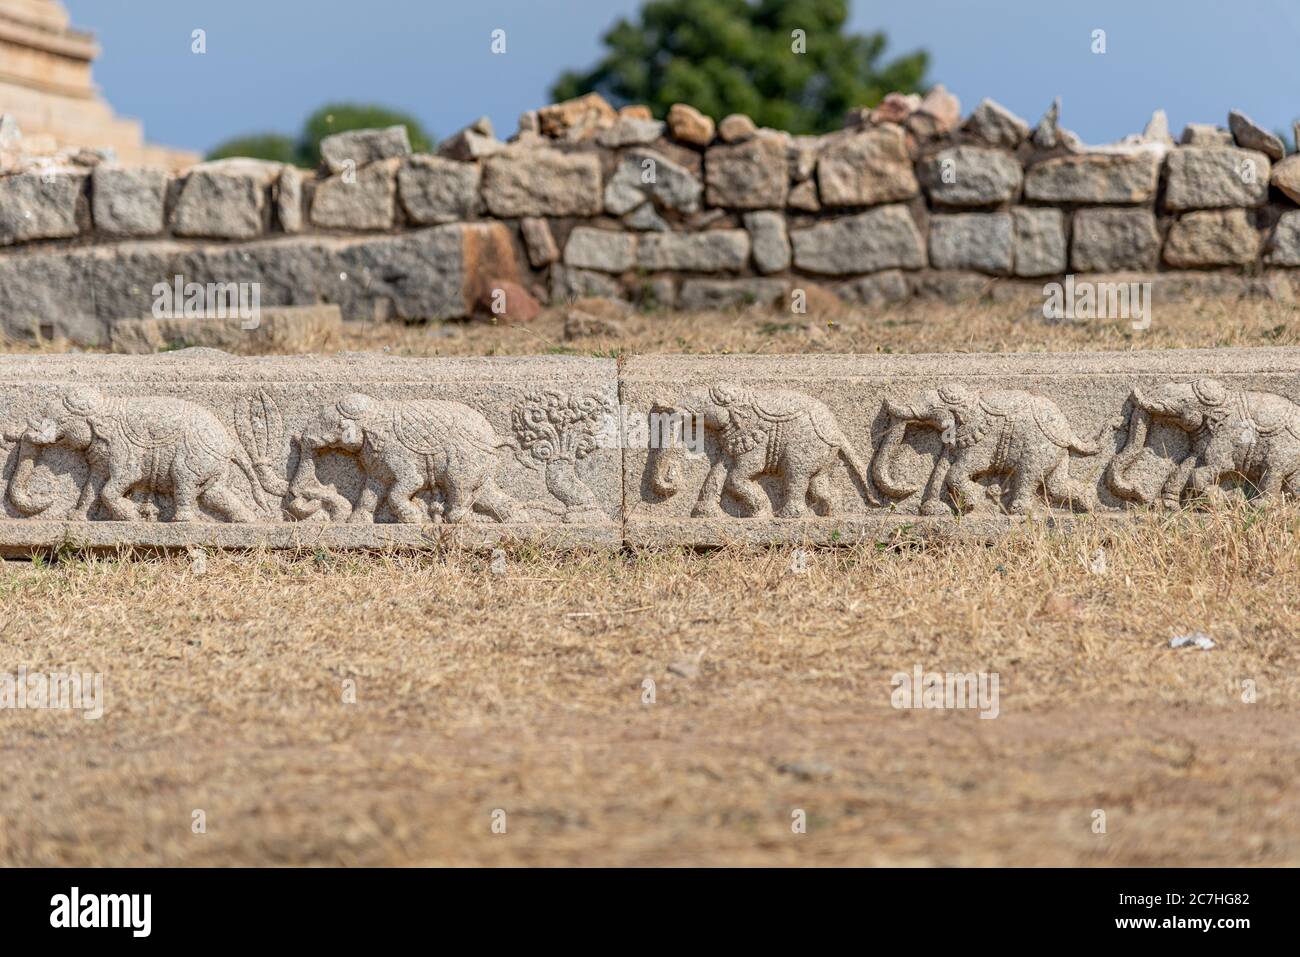 Stone edge with elephant relief and weathered wall in the background Stock Photo